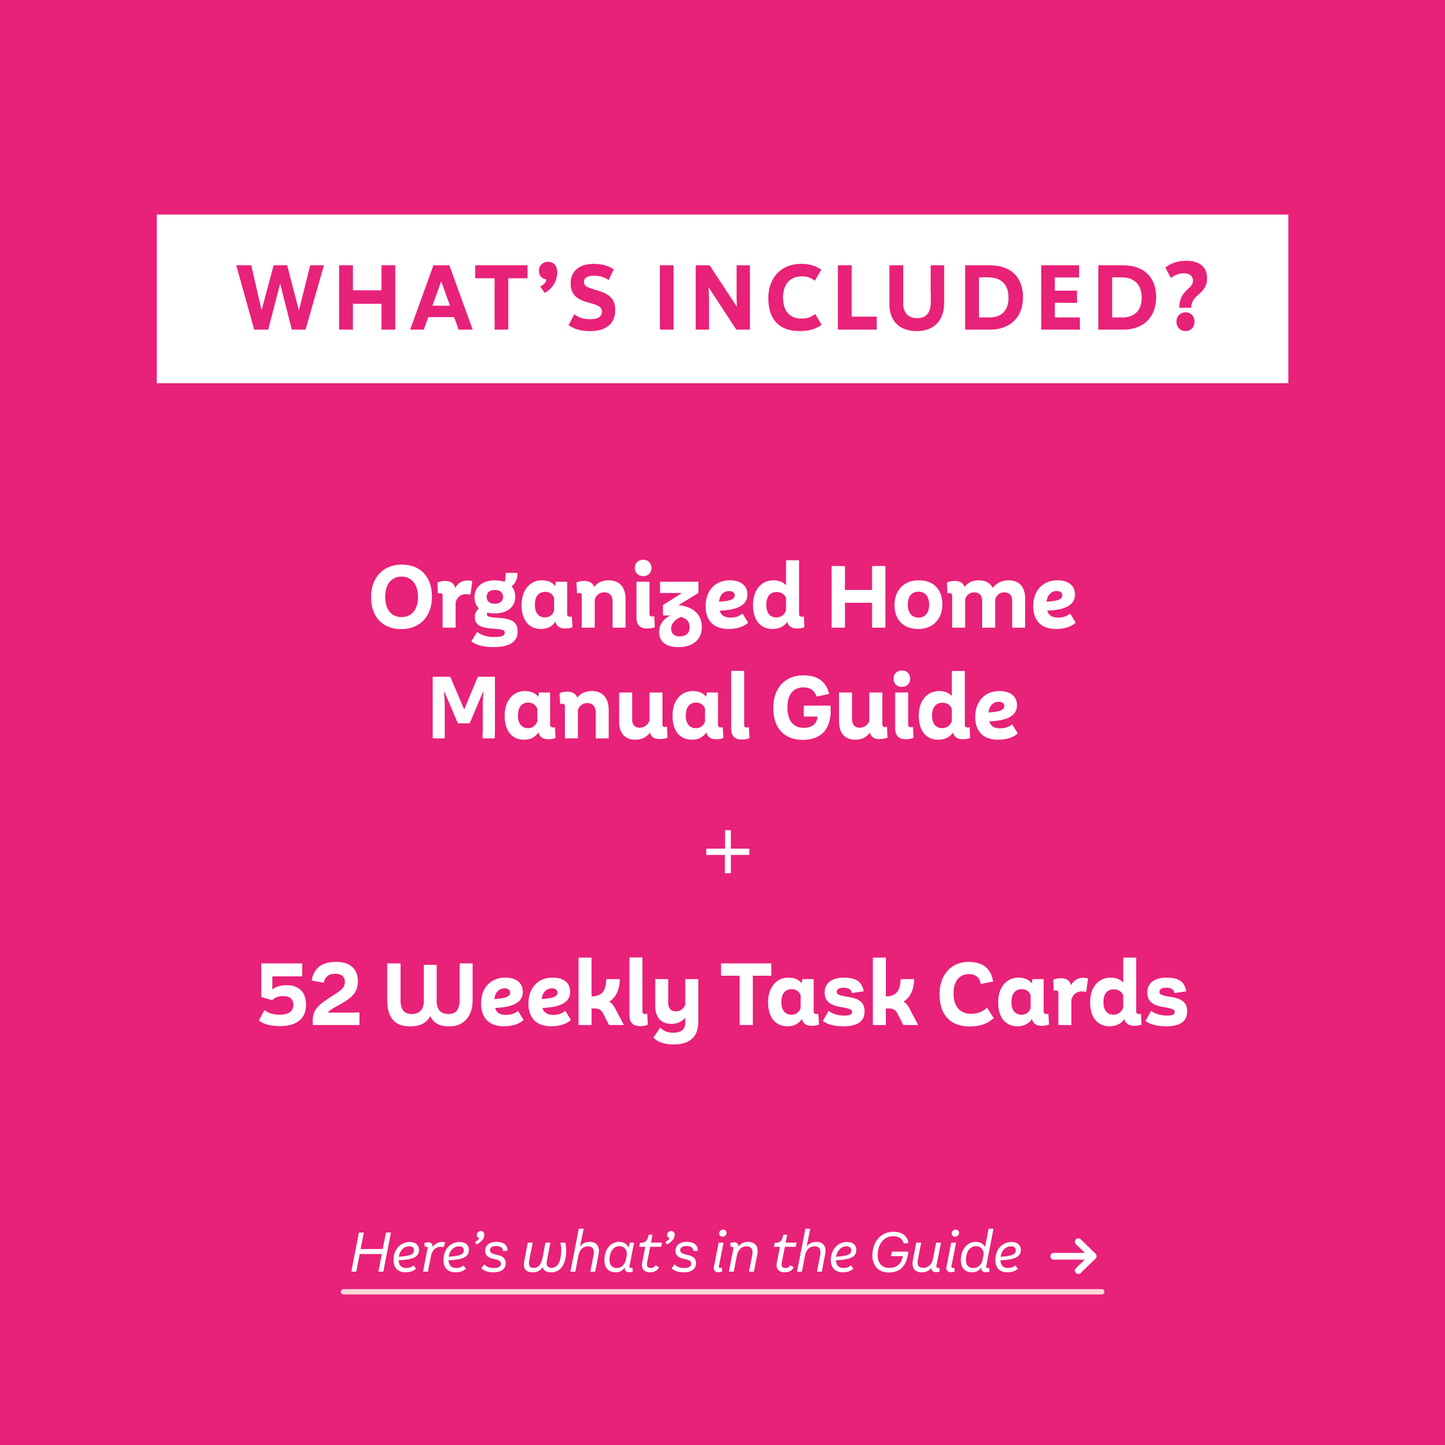 The Organized Home Manual